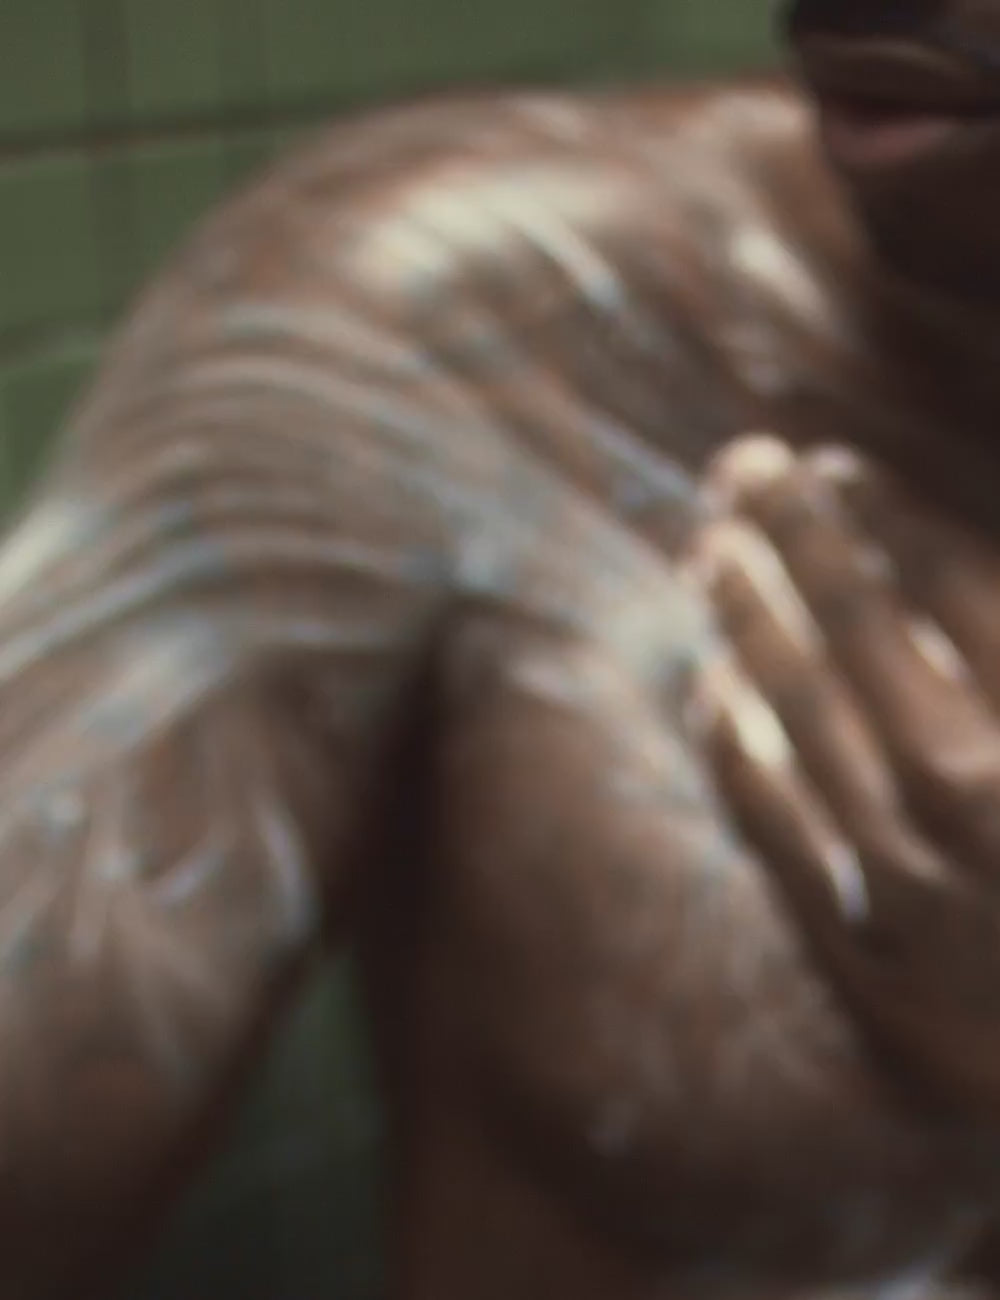 A video of a man's hand rubbing body wash onto his shoulder